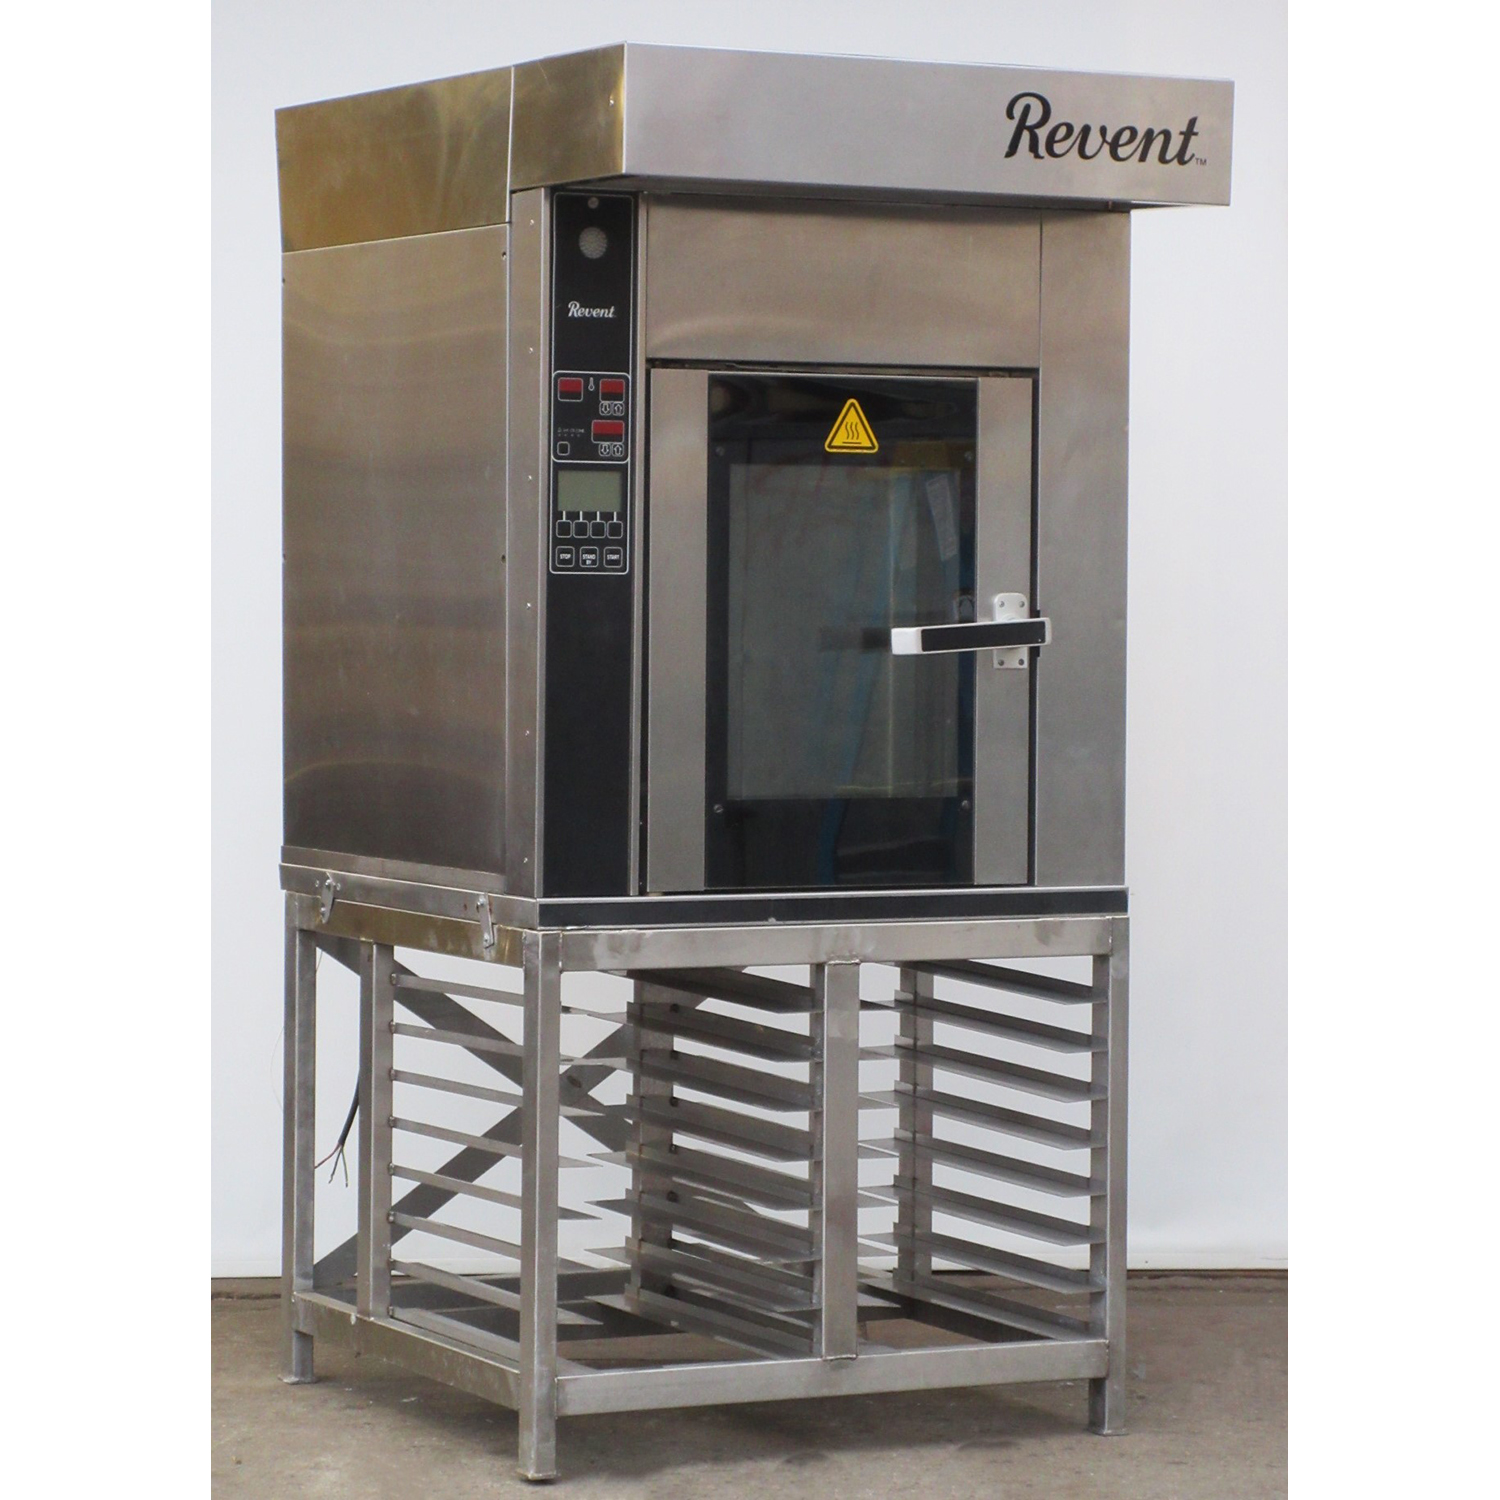 Revent 739U-EL Rack Oven, Electric, Used Excellent Condition